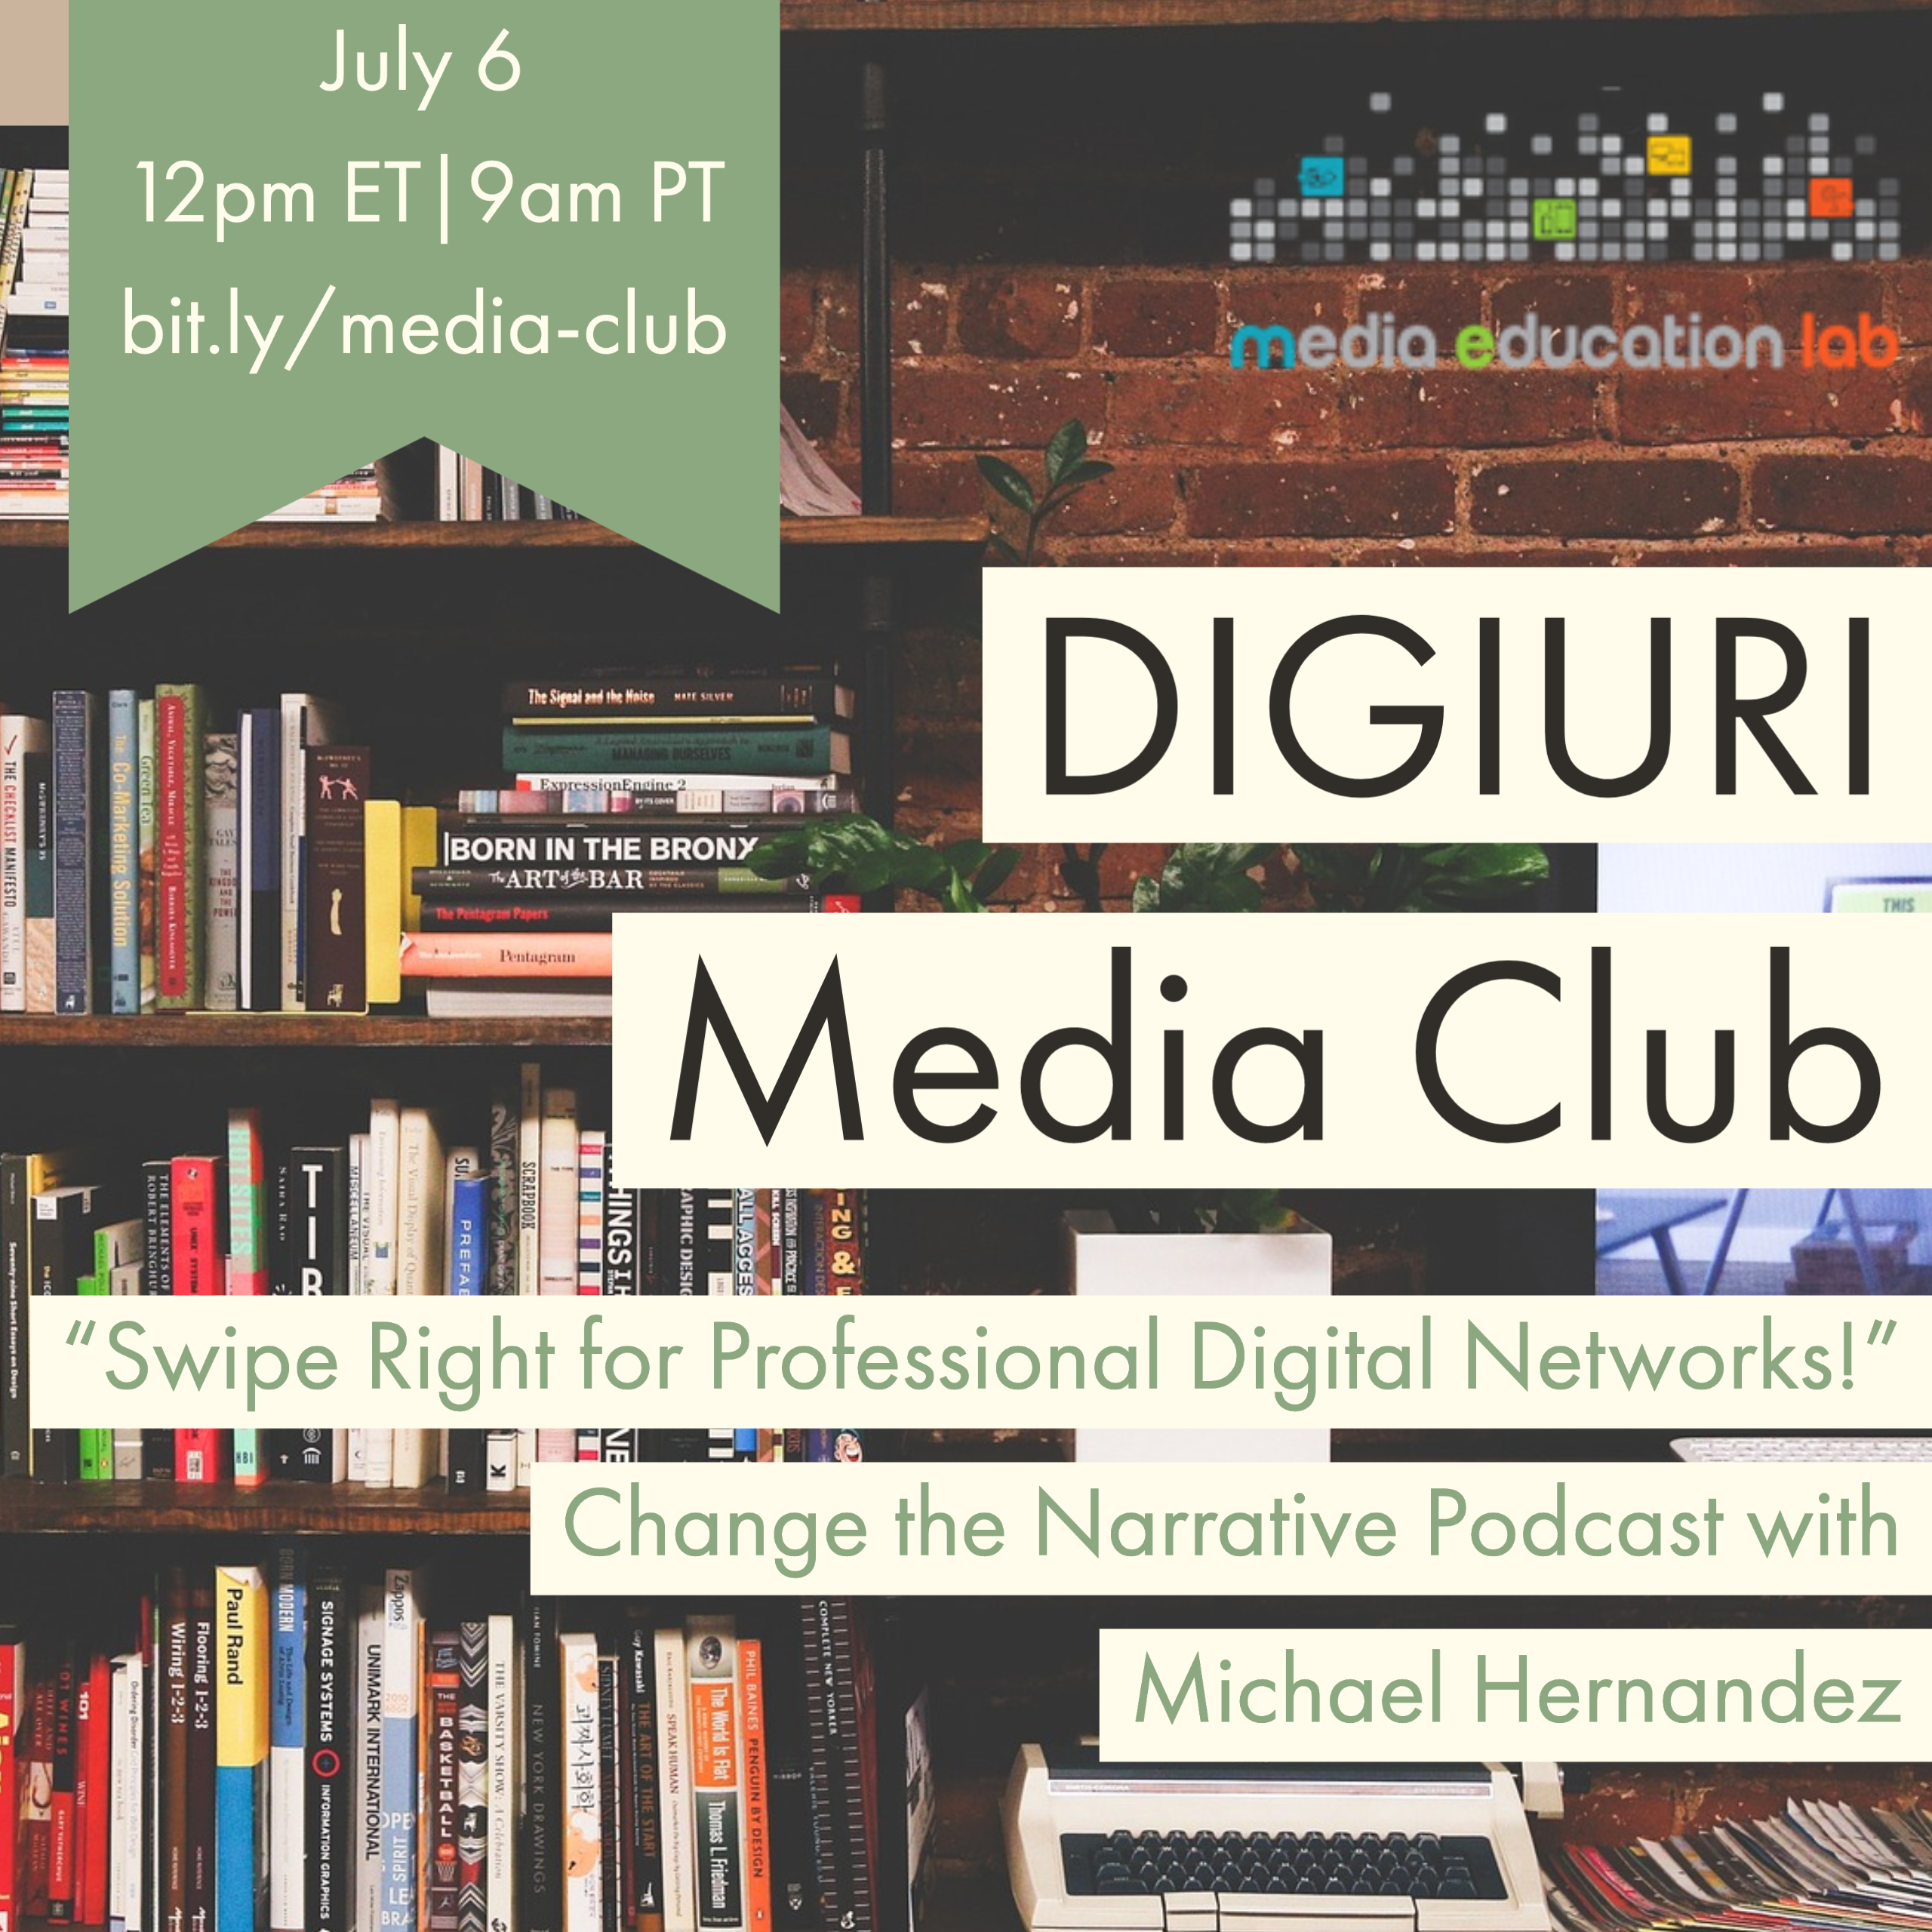 DigiURI Media Club - Finding Inspiration with Change the Narrative Podcast